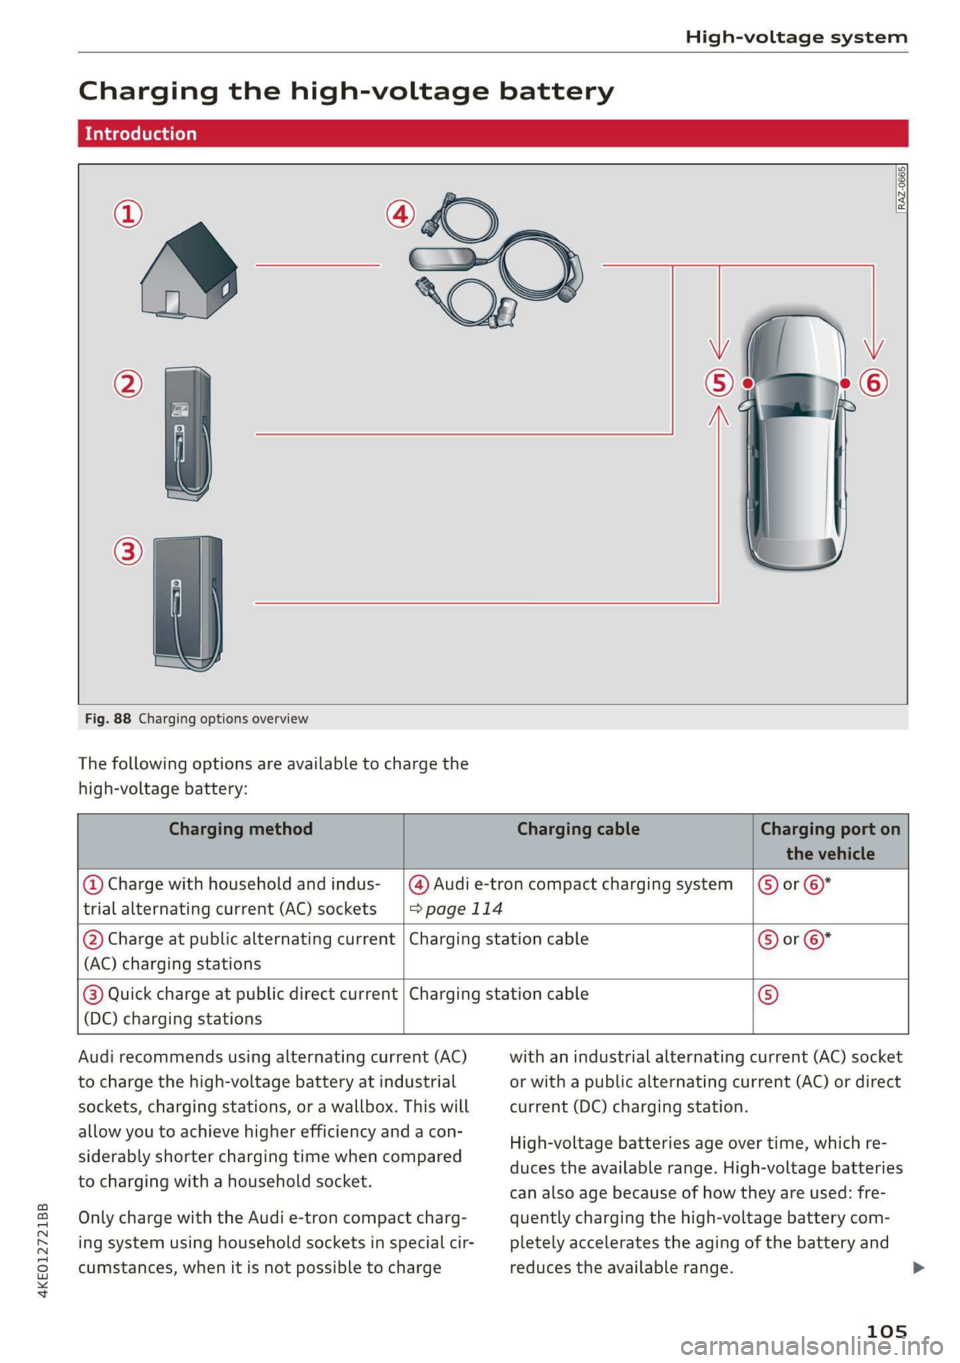 AUDI E-TRON 2019 User Guide 4KE012721BB 
High-voltage system 
  
Charging the high-voltage battery 
Introduction   
  
@ 
[RAZ-0665] 
  
    
  
    
  
      
Fig. 88 Charging options overview 
The following options are availab